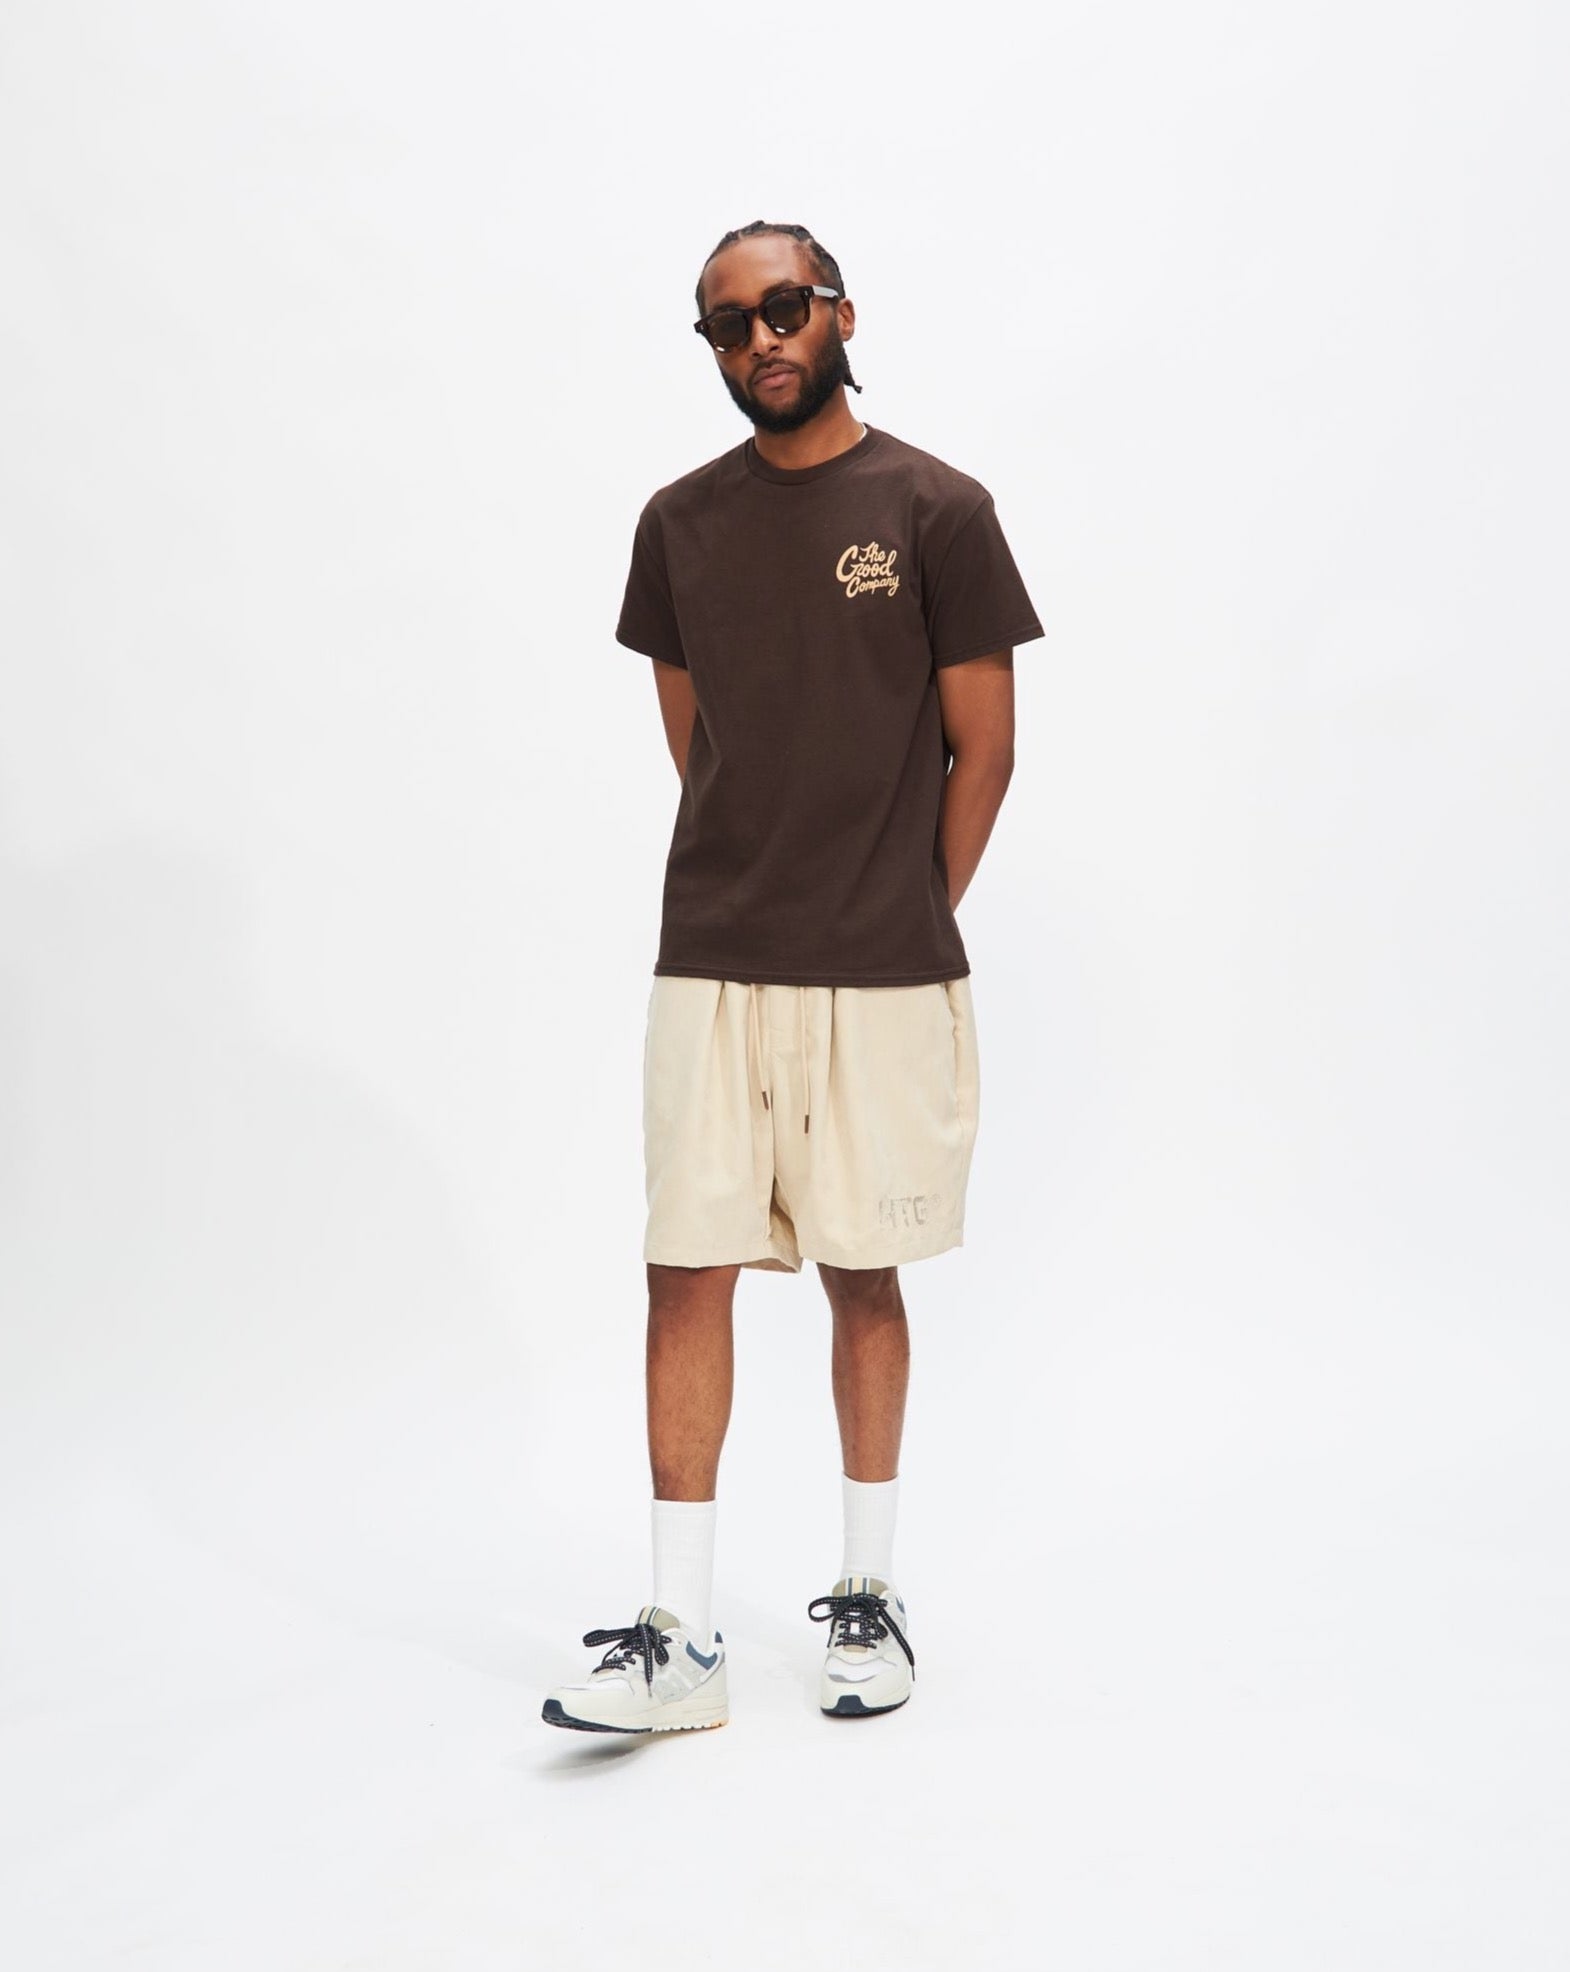 Good Time Tee in Brown